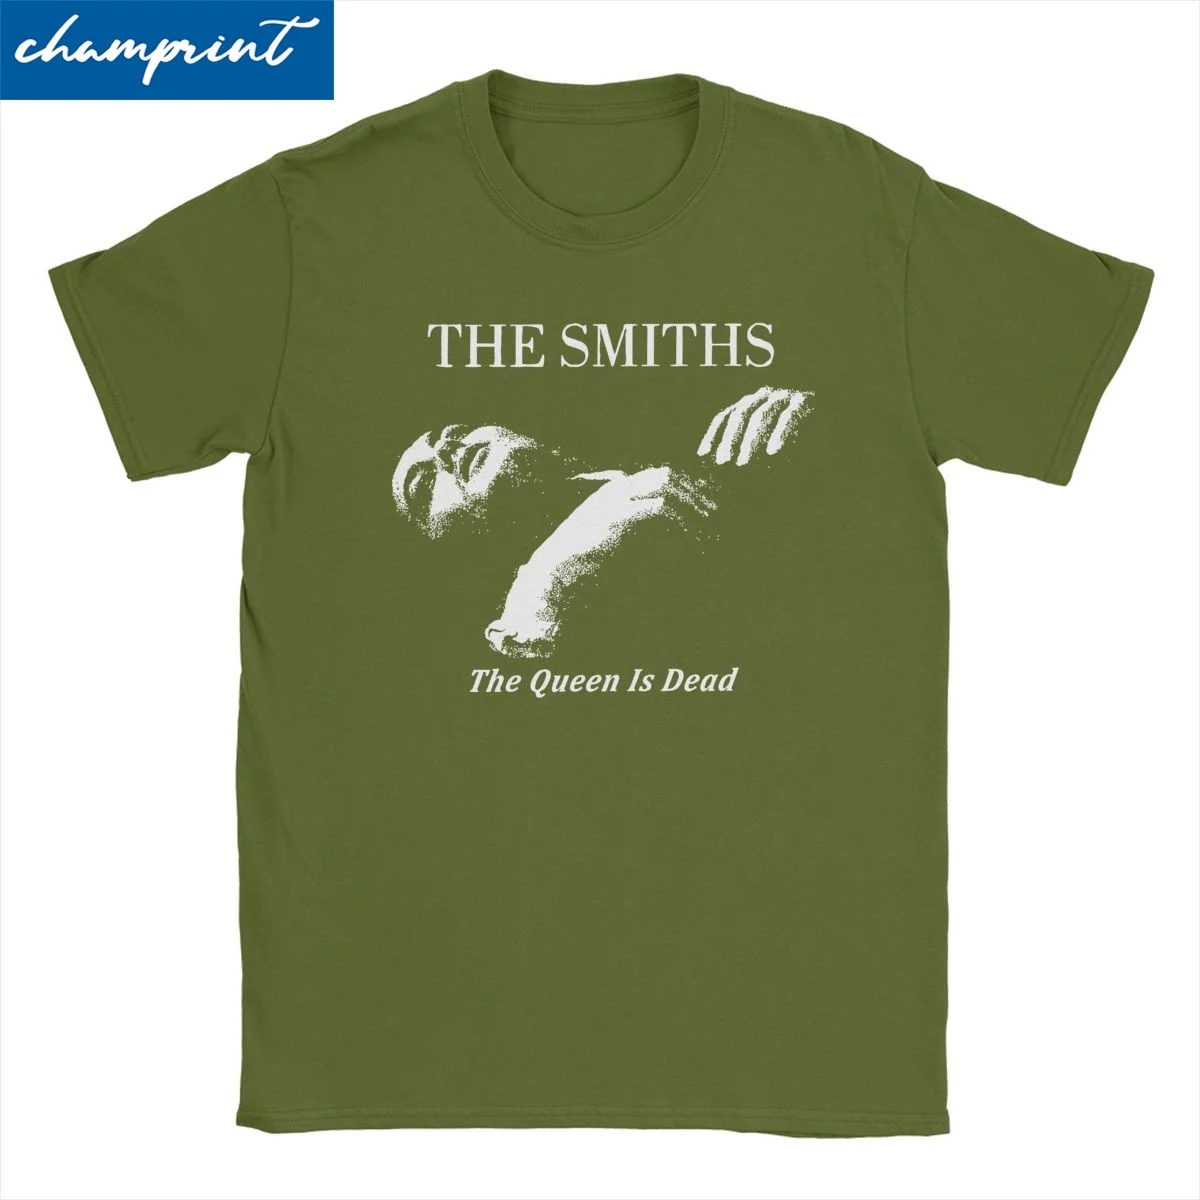 

The Smiths The Queen Is Dead T Shirt Men Women Pure Cotton Funny T-Shirts Crewneck 1980's Rock Tees Short Sleeve Clothes Printed